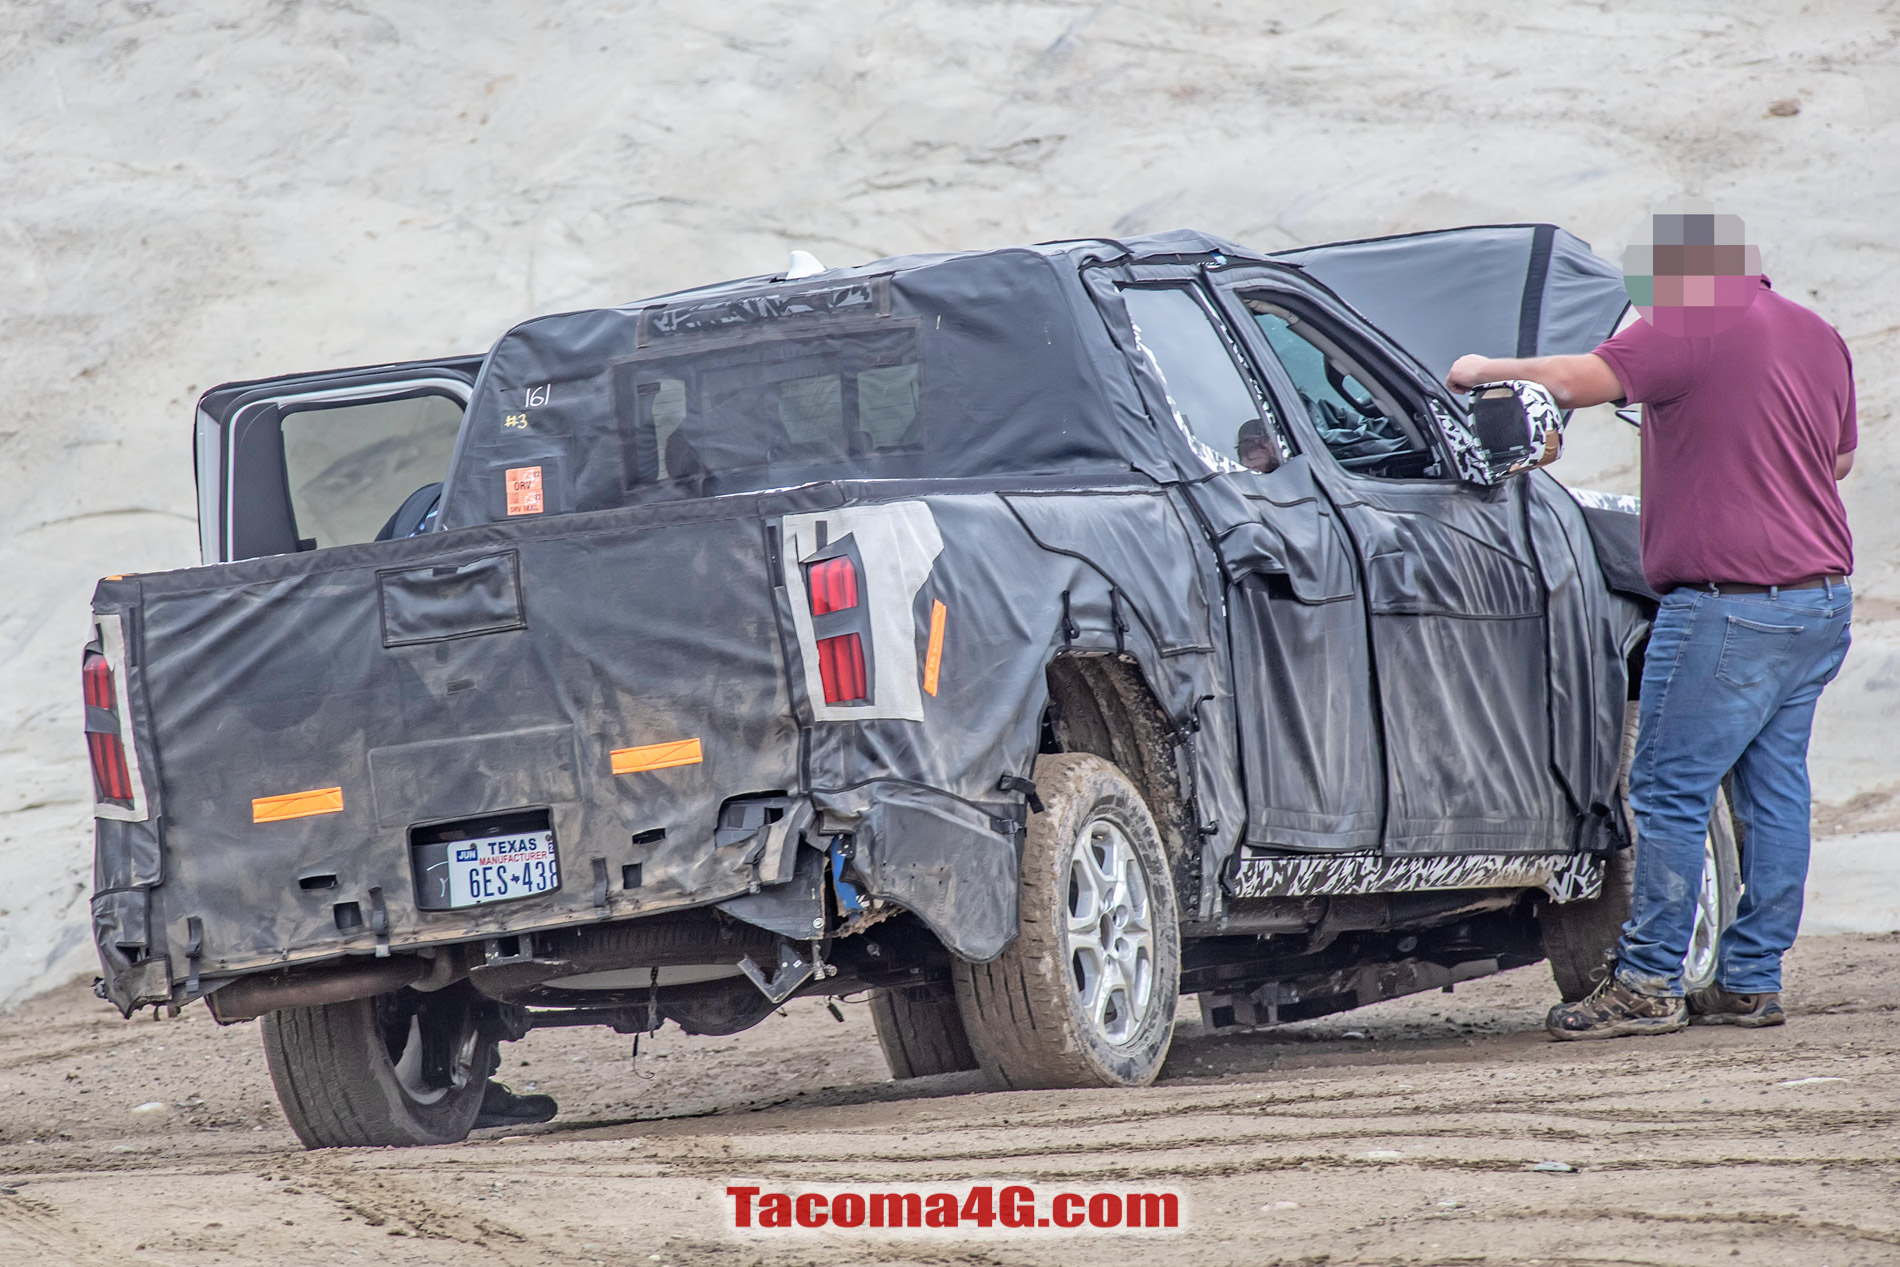 2024 Tacoma New 2024 Tacoma (4th Next Gen) Mule Off-Road Testing Reveals More Suspension Details -- 5/27/22 2024 Toyota Tacoma 4th gen spy photos suspension interior 5